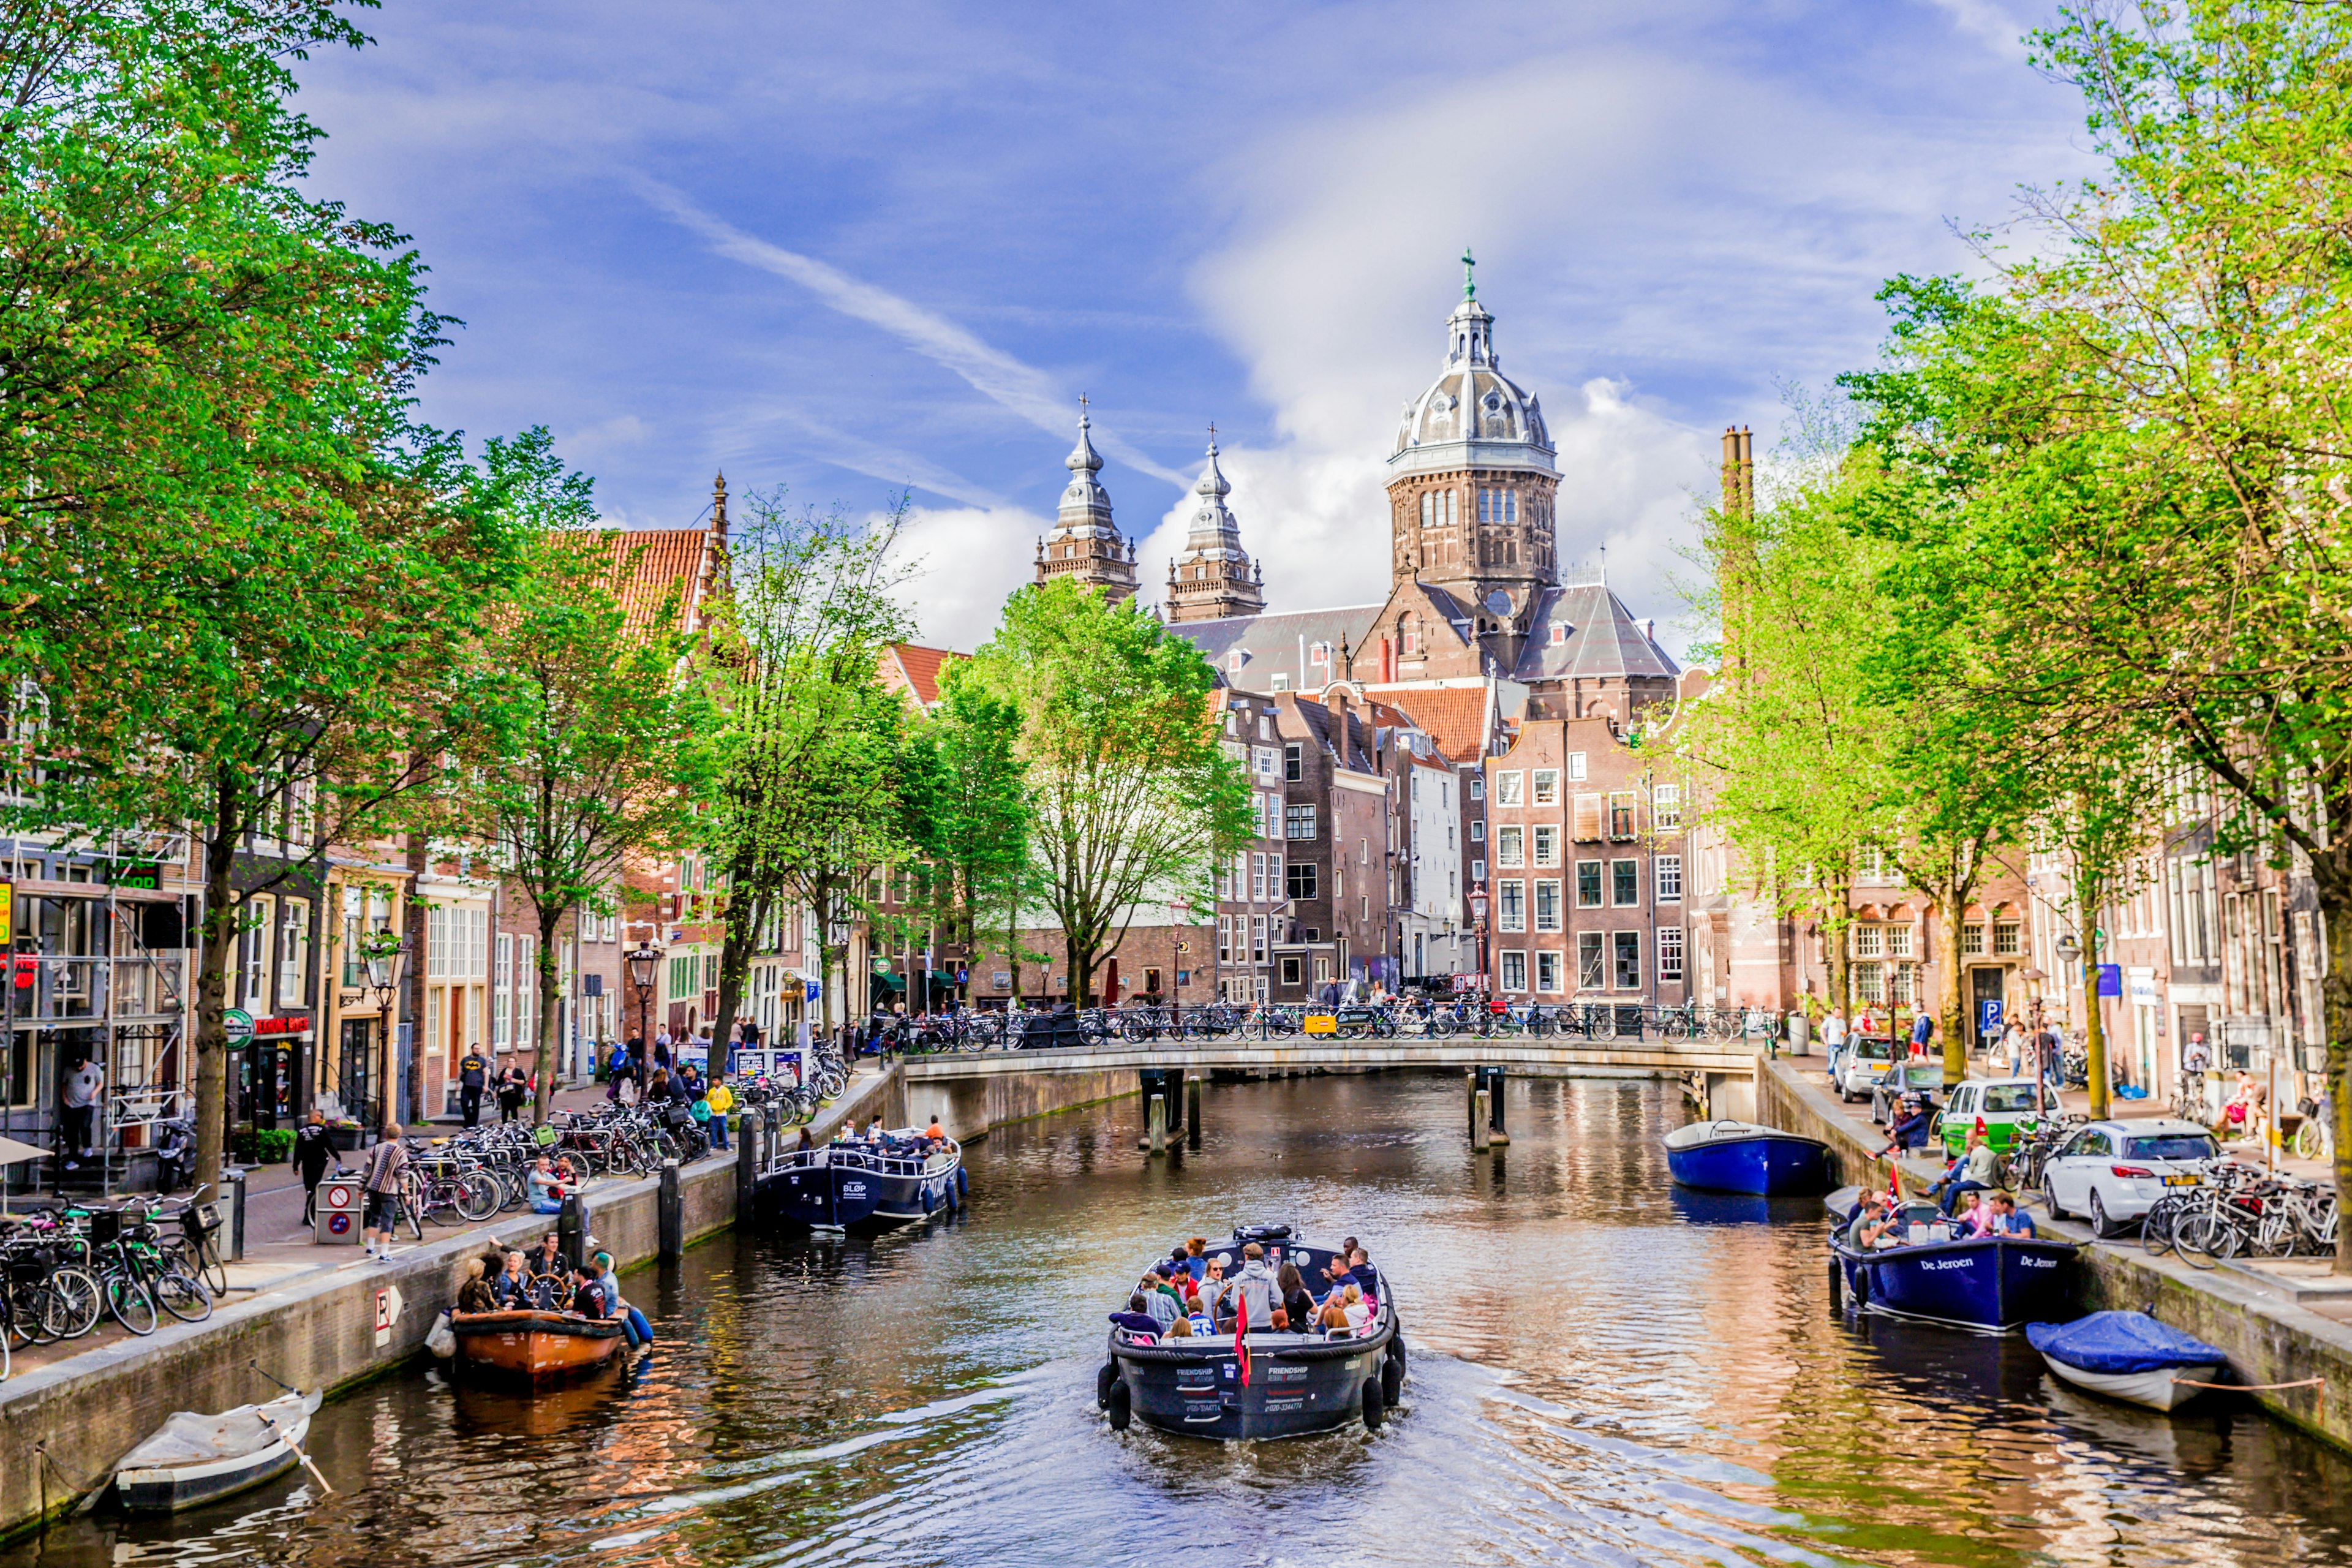 May 24, 2017: Tour boats in a Dutch canal on a sunny day in the Red Light District.